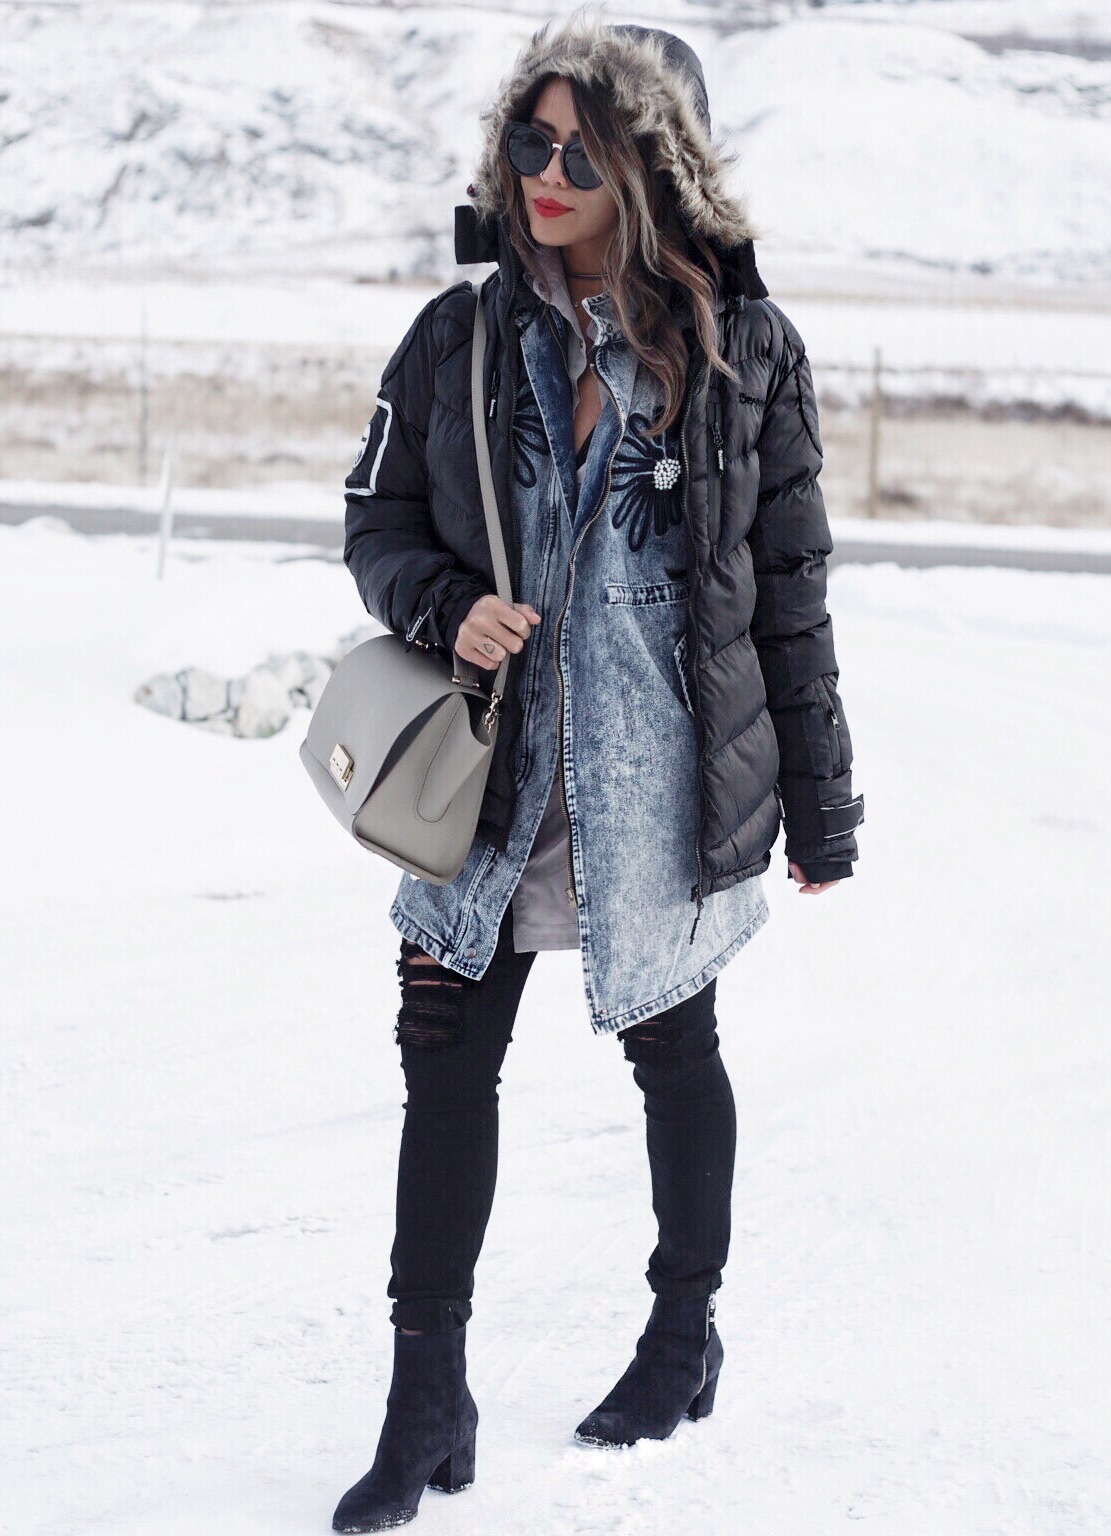 How to Look Chic in a Puffy Jacket